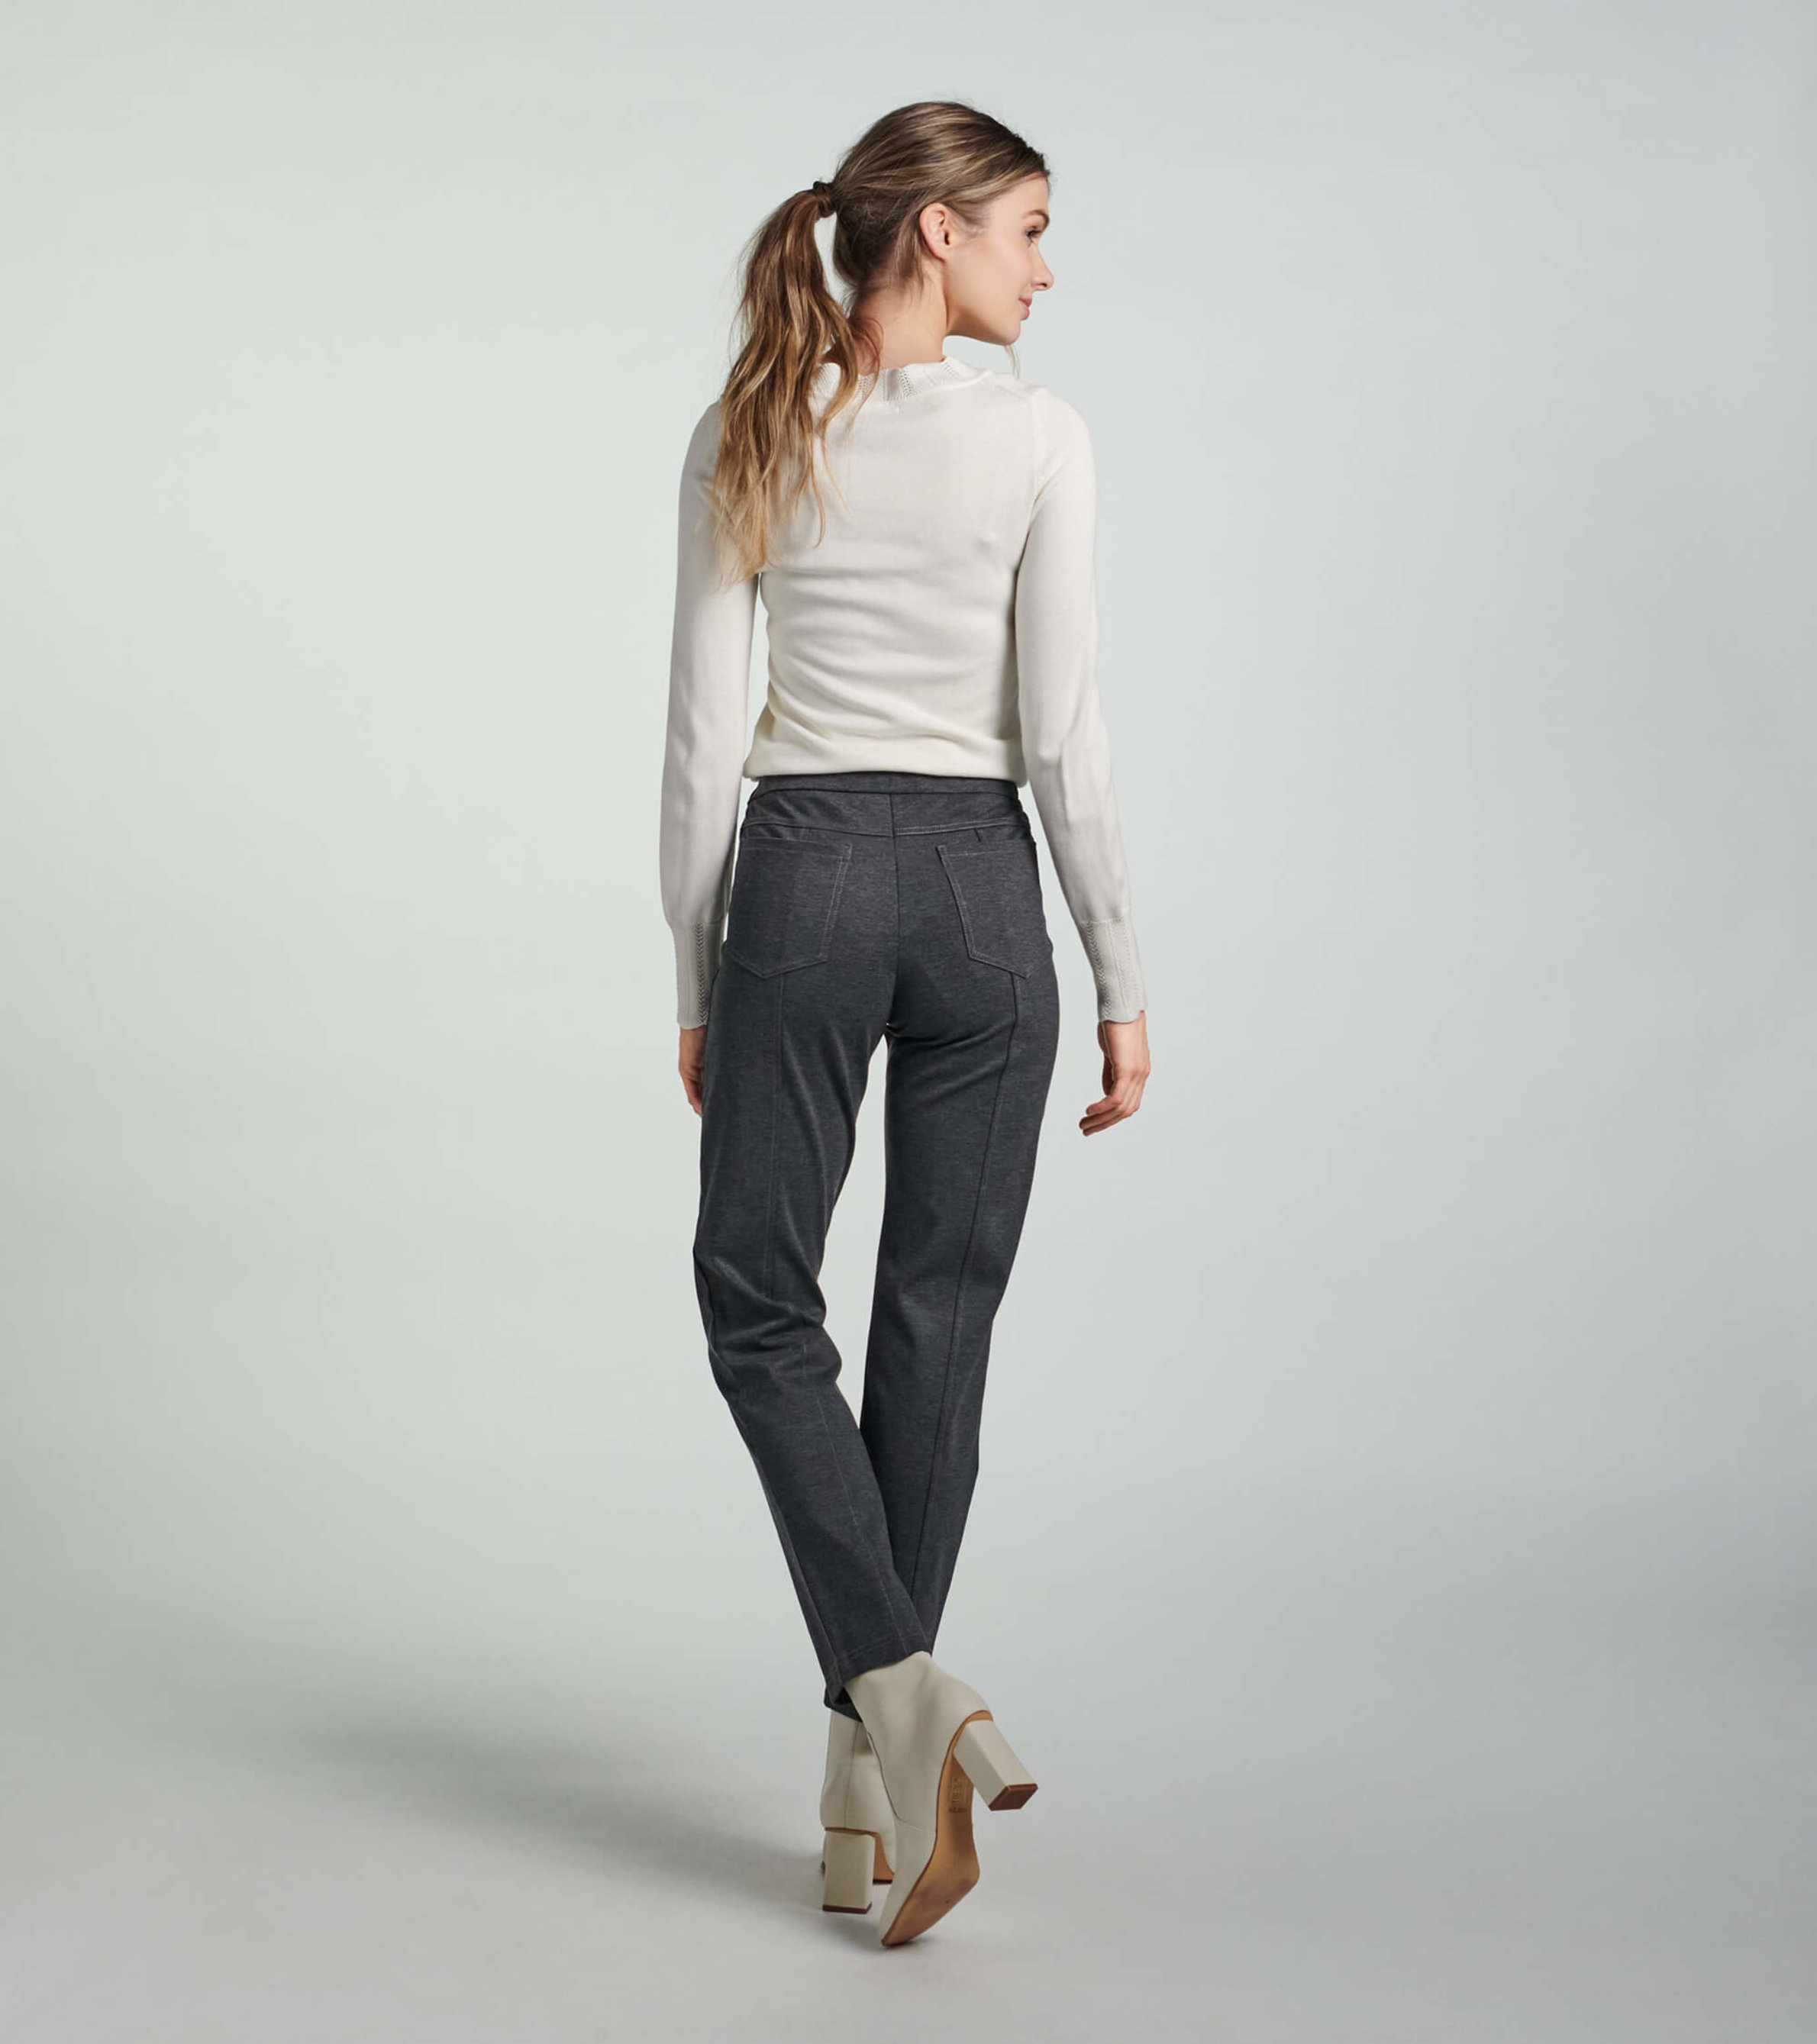 May You Be Women's mid-Rise Ponte Legging Pants Charcoal/Grey